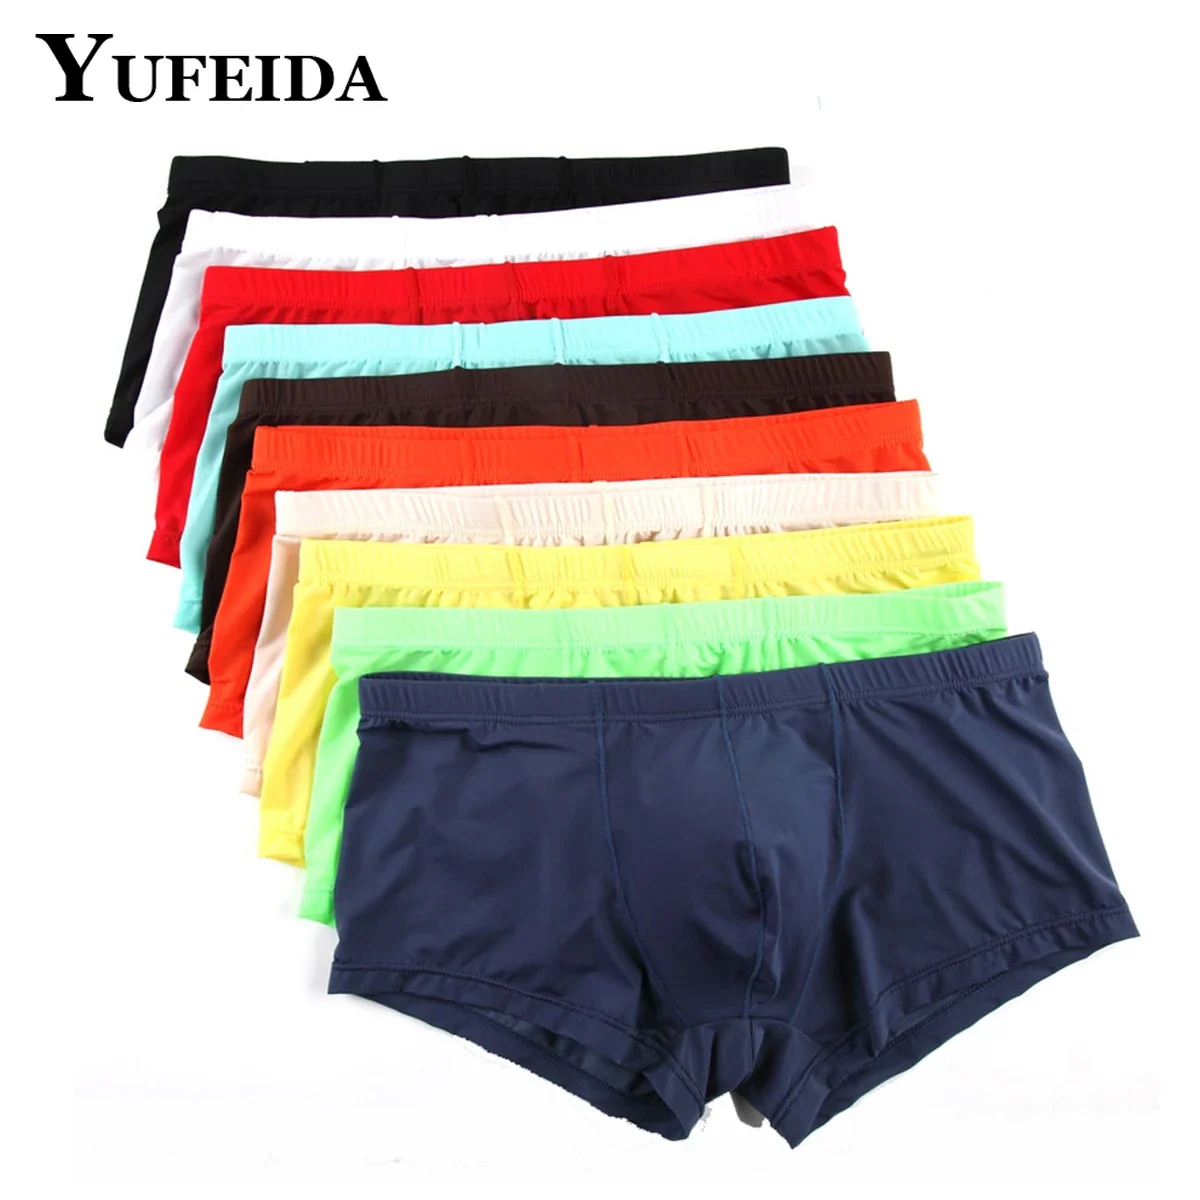 YUFEIDA 10pcs Mens Ultra Thin Boxer Shorts Underwear Cool Ice Silk Men's Boxers Underpant Super Breathable Men Sexy Slim Panties 10pcs free shiping the high quality of ultra thin deep groove ball bearings 61704zz 6704zz 6704 2rs 20 27 4 mm